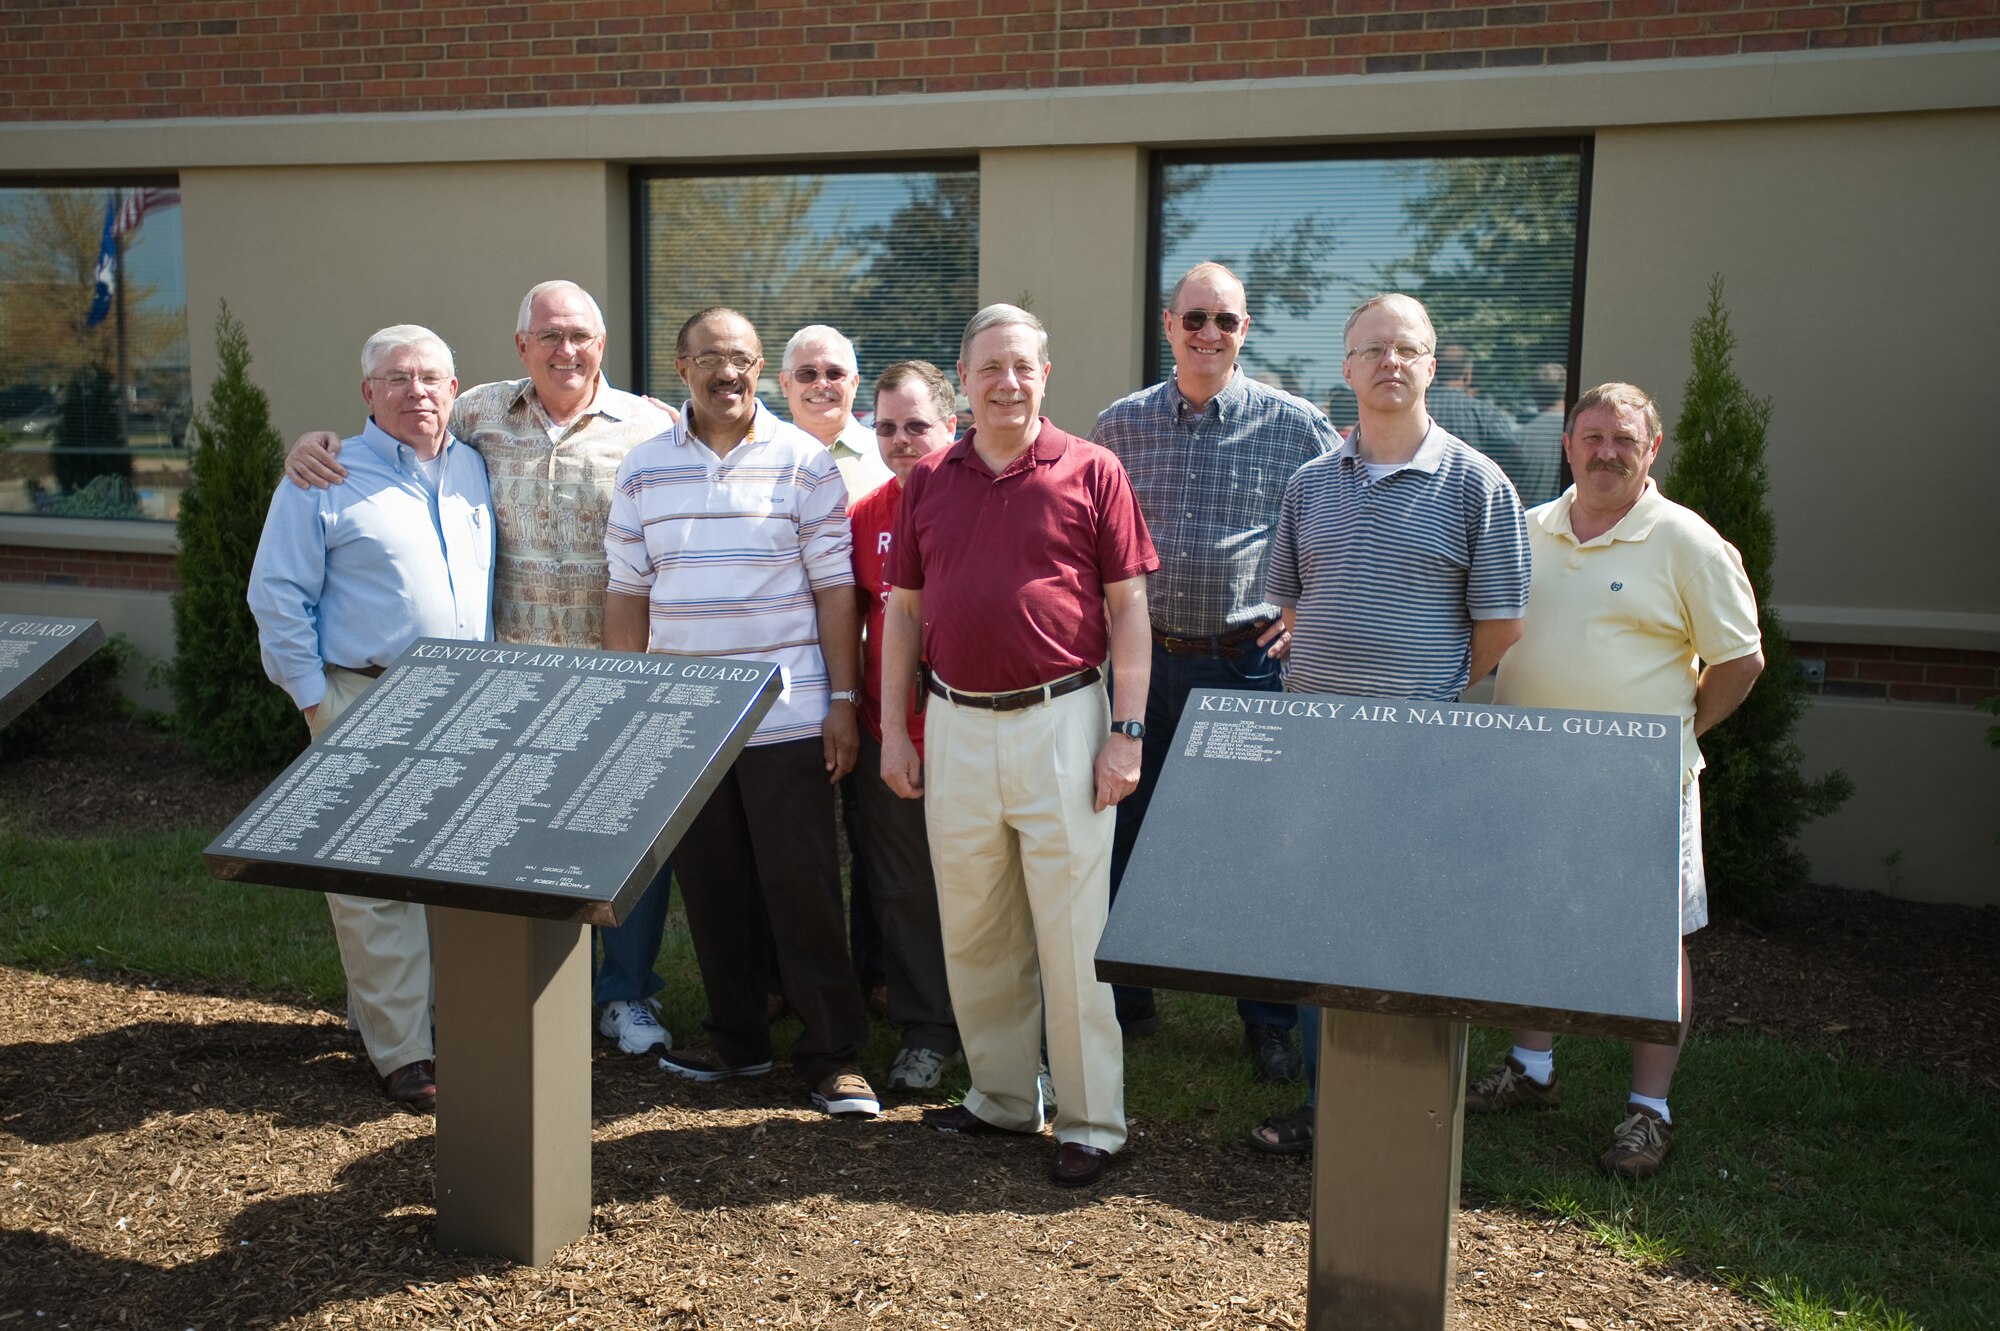 Members of the Kentucky Air National Guard who retired in 2007 stand behind black granite retiree plaques that were dedicated at the base on April 18. (USAF Photo by Capt. Dale Greer.)